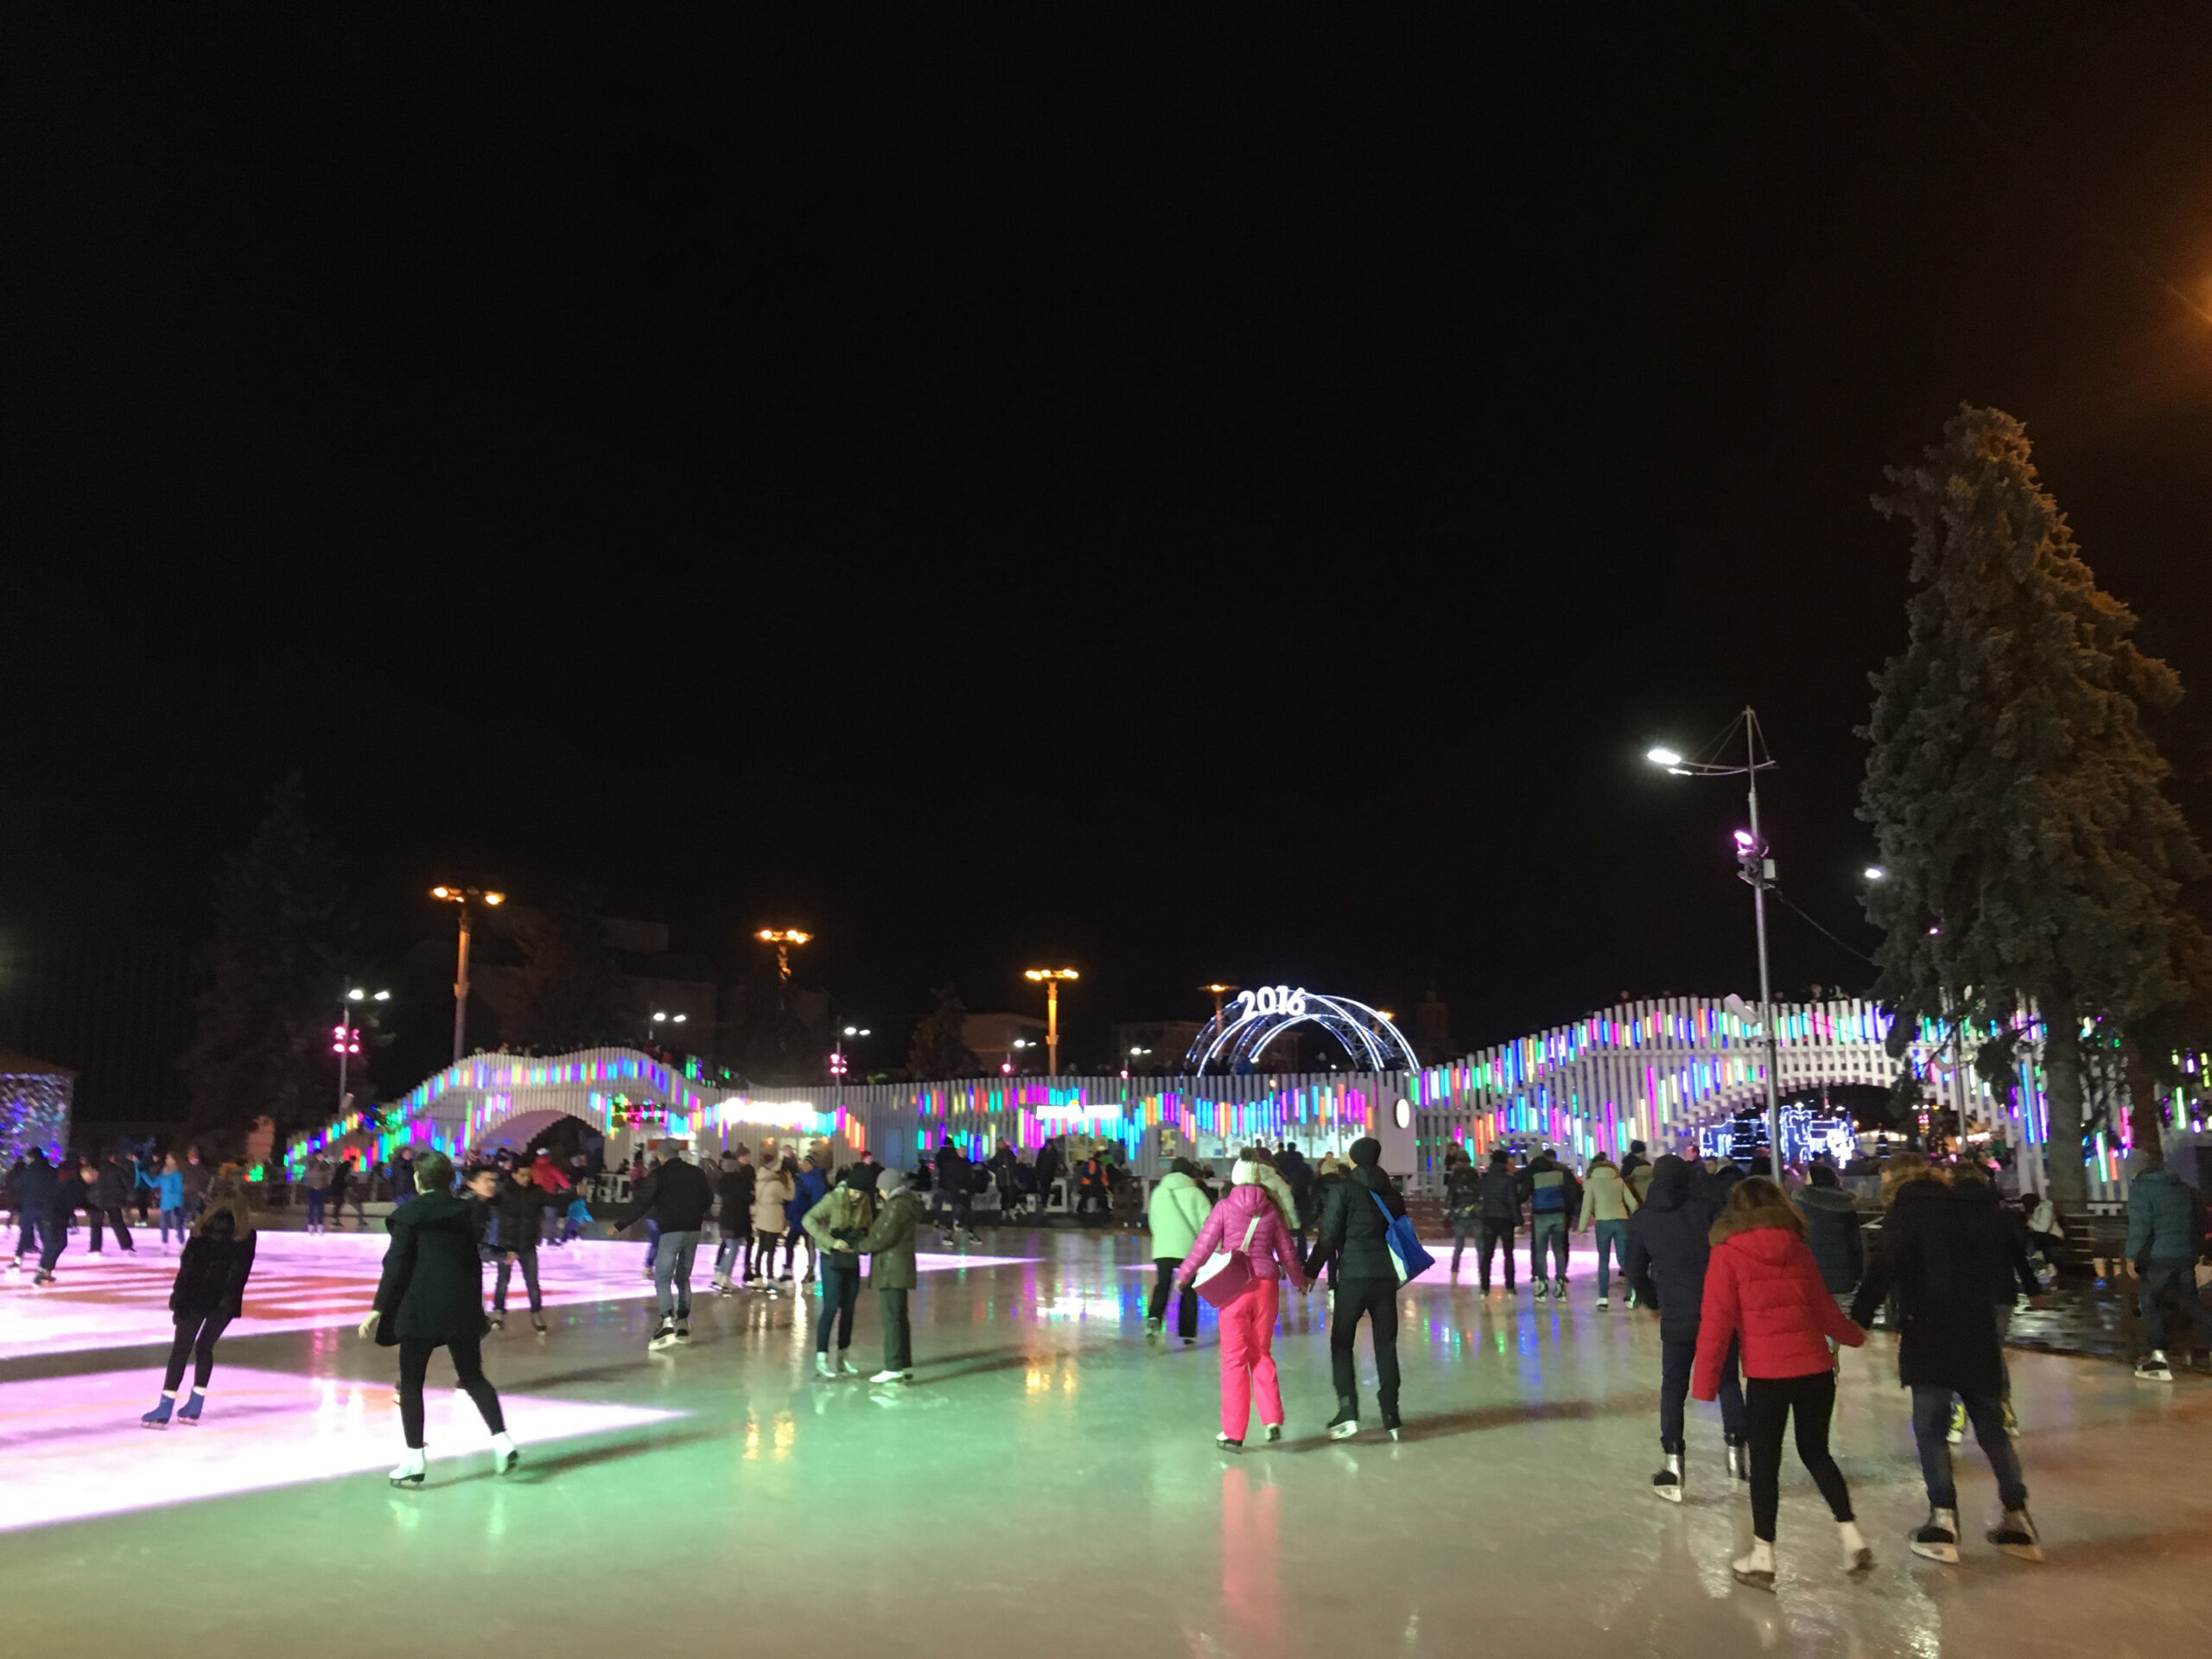 Ice skaters fill the rink at VDNKh in Moscow, Russia.